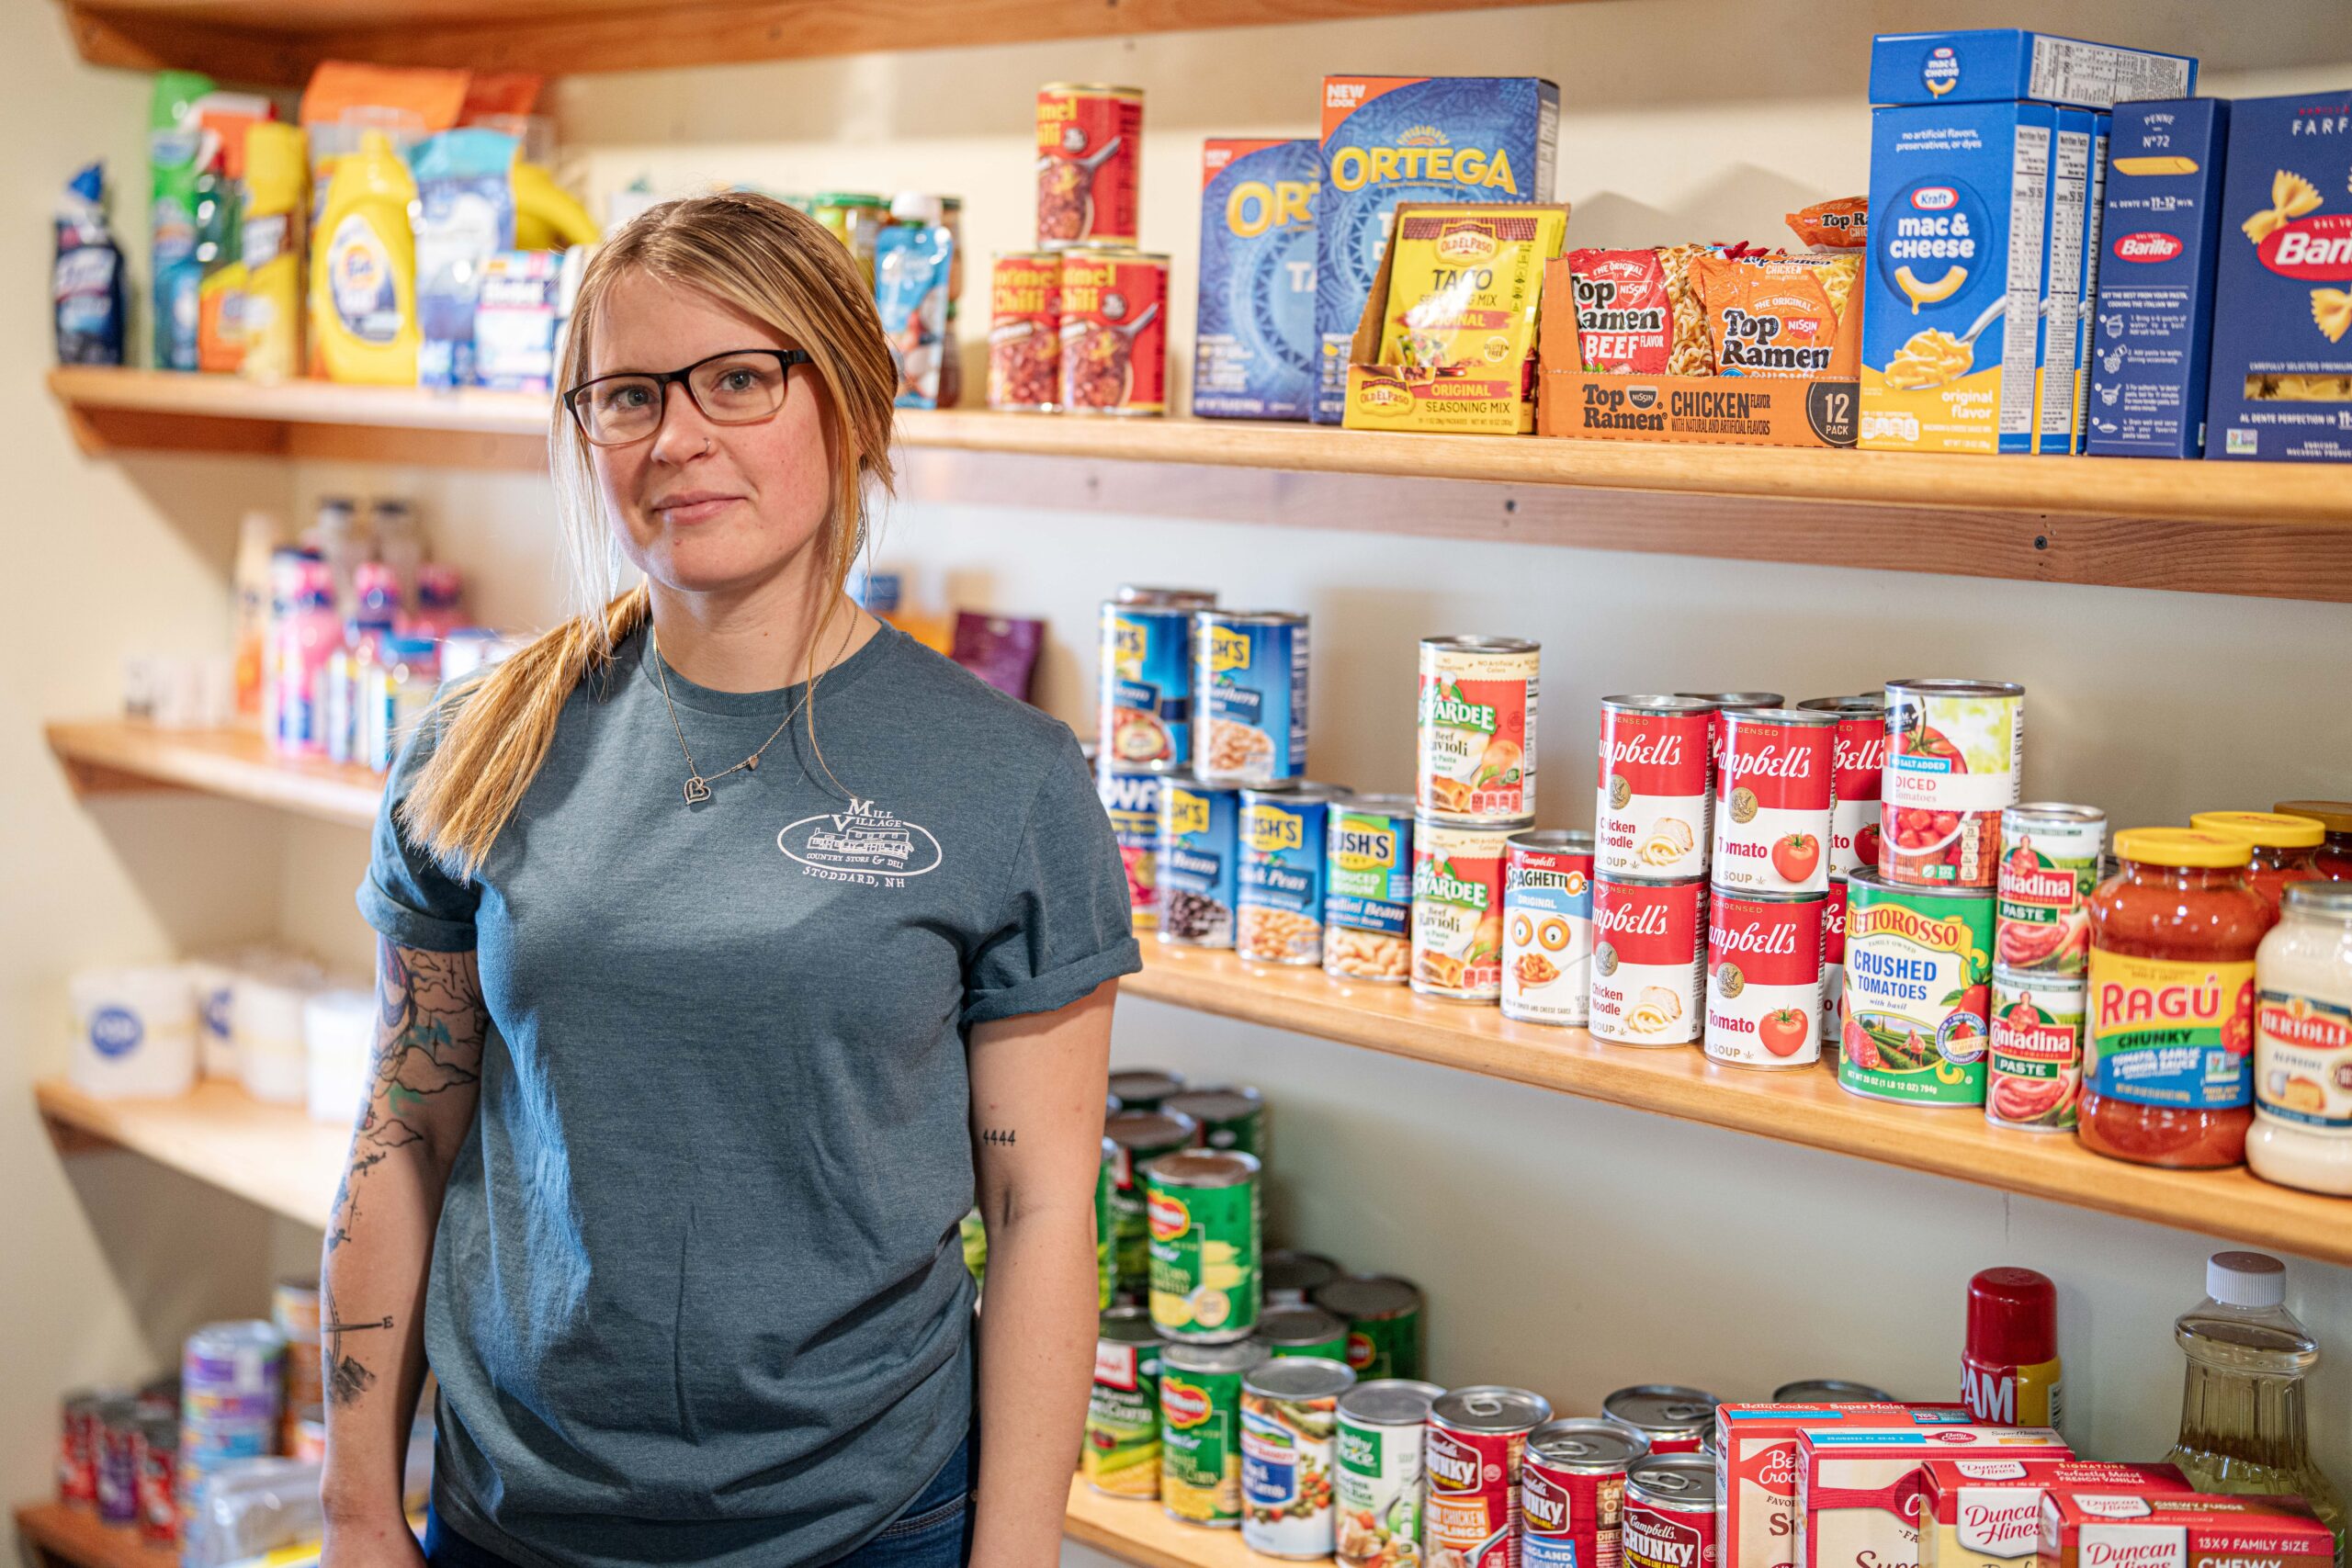 Small business owner standing in front of store shelves with non-perishable groceries.